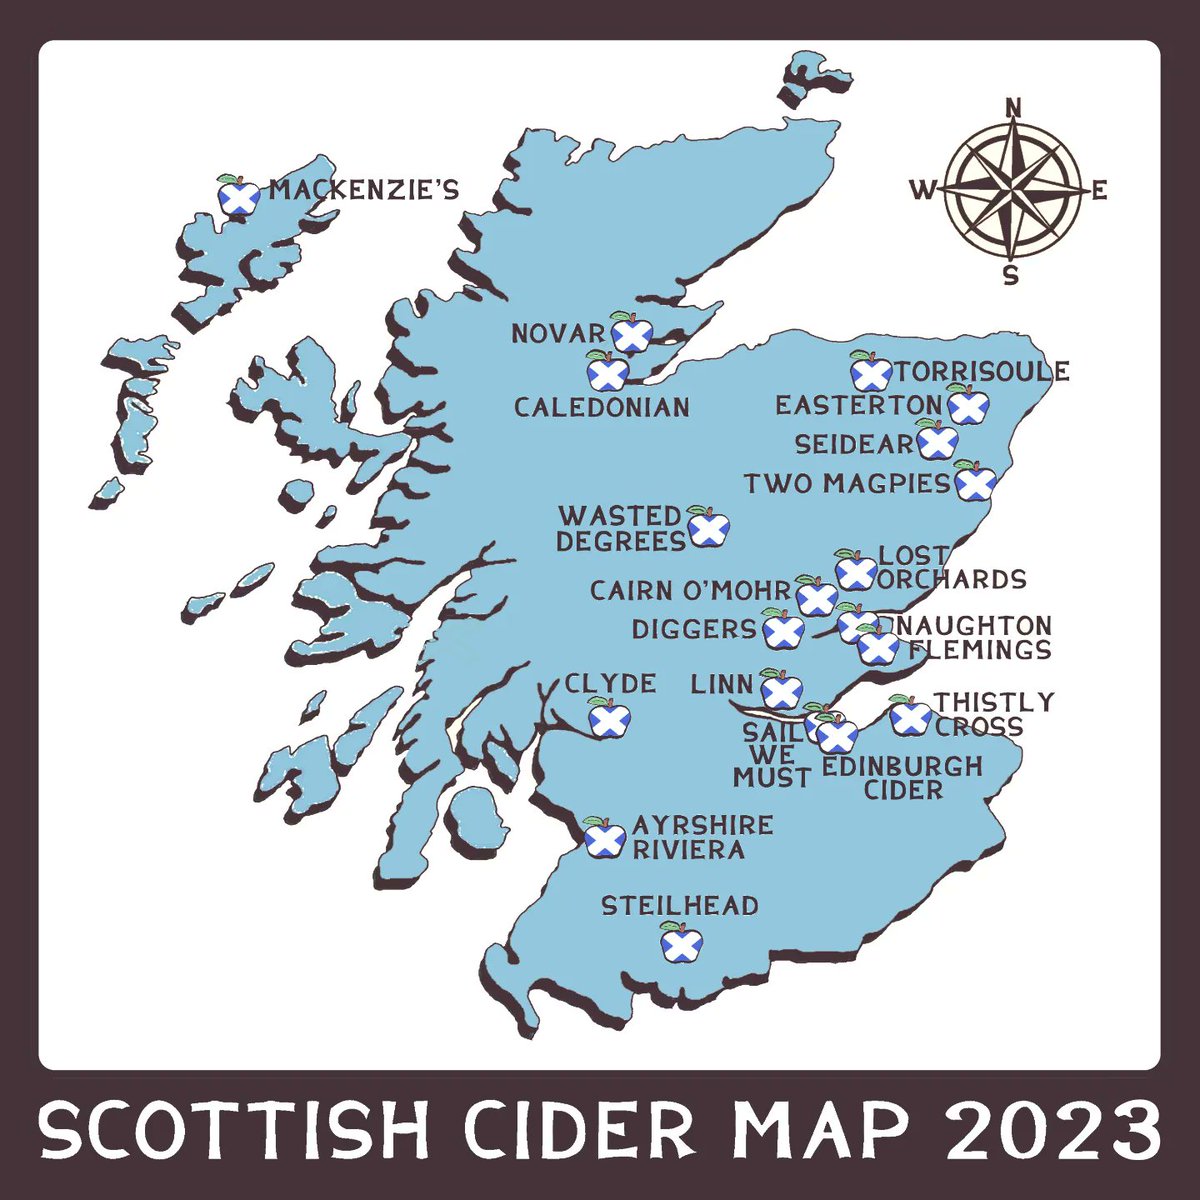 Another year nearly done and we've another 4 cidermakers to add to our map #scottishcider